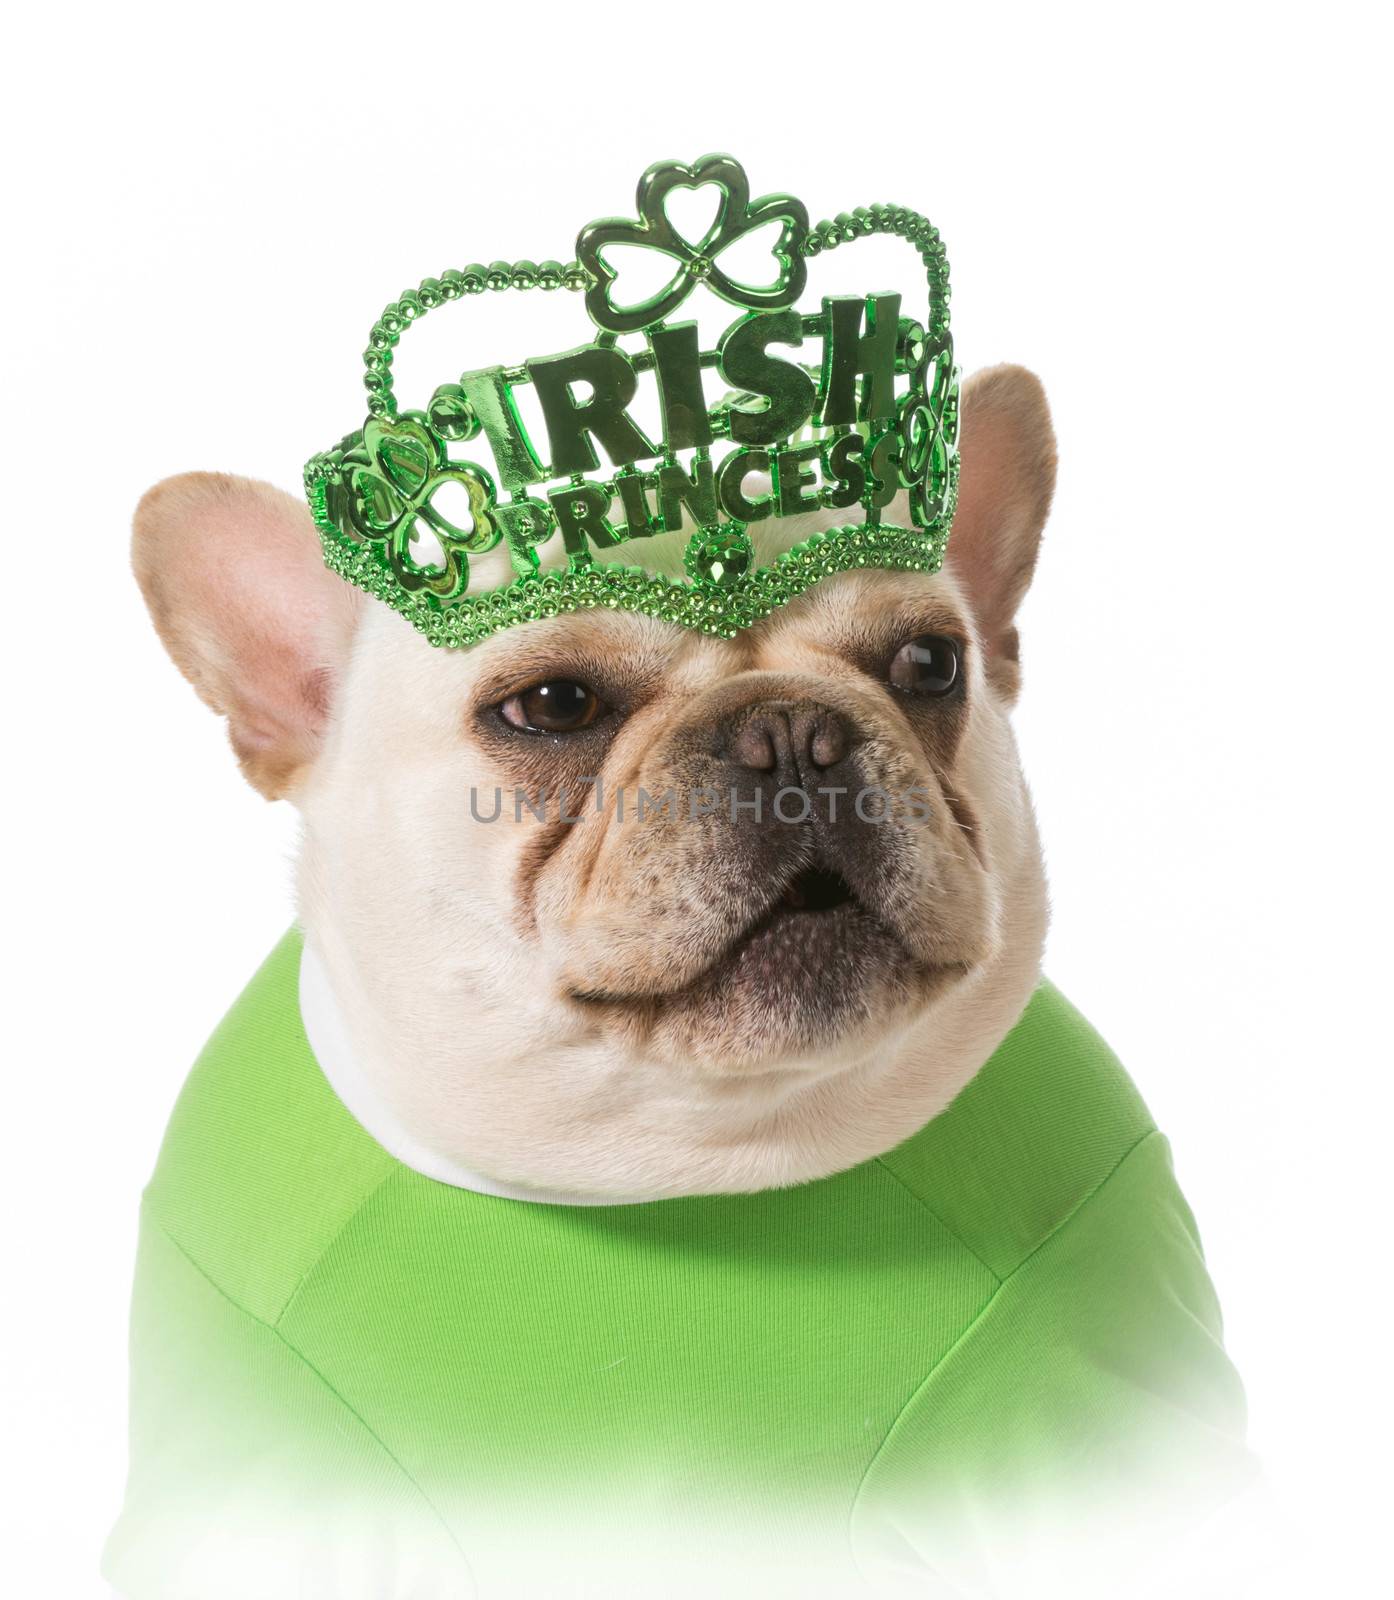 St Patricks Day dog by willeecole123